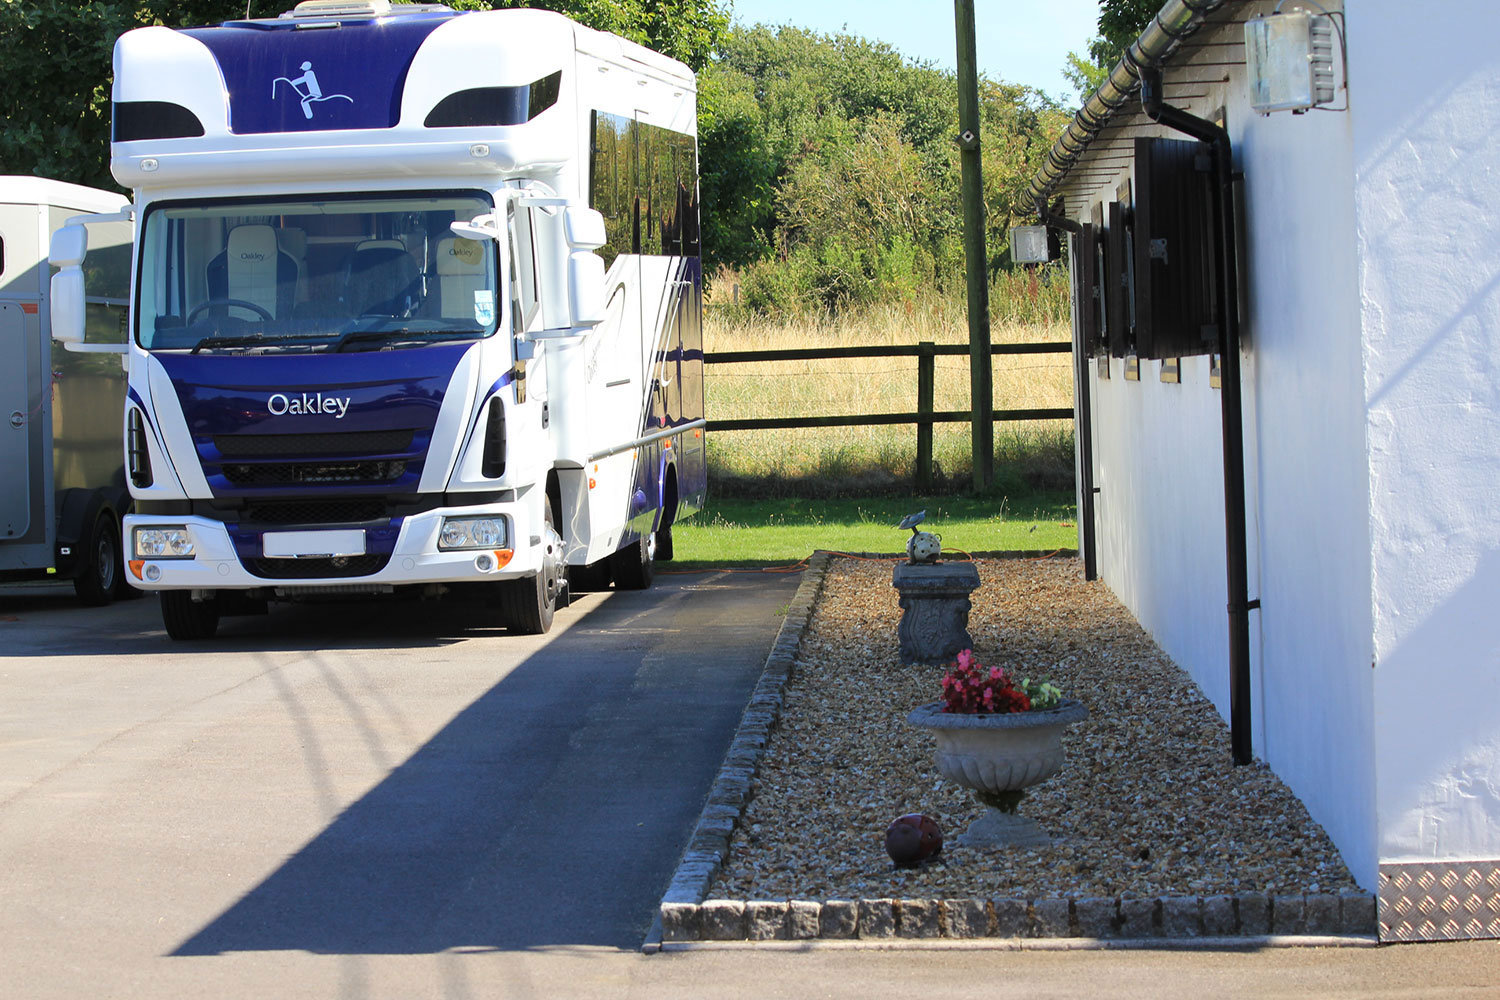 We have hard standing throughout with hookups for trailers and lorries